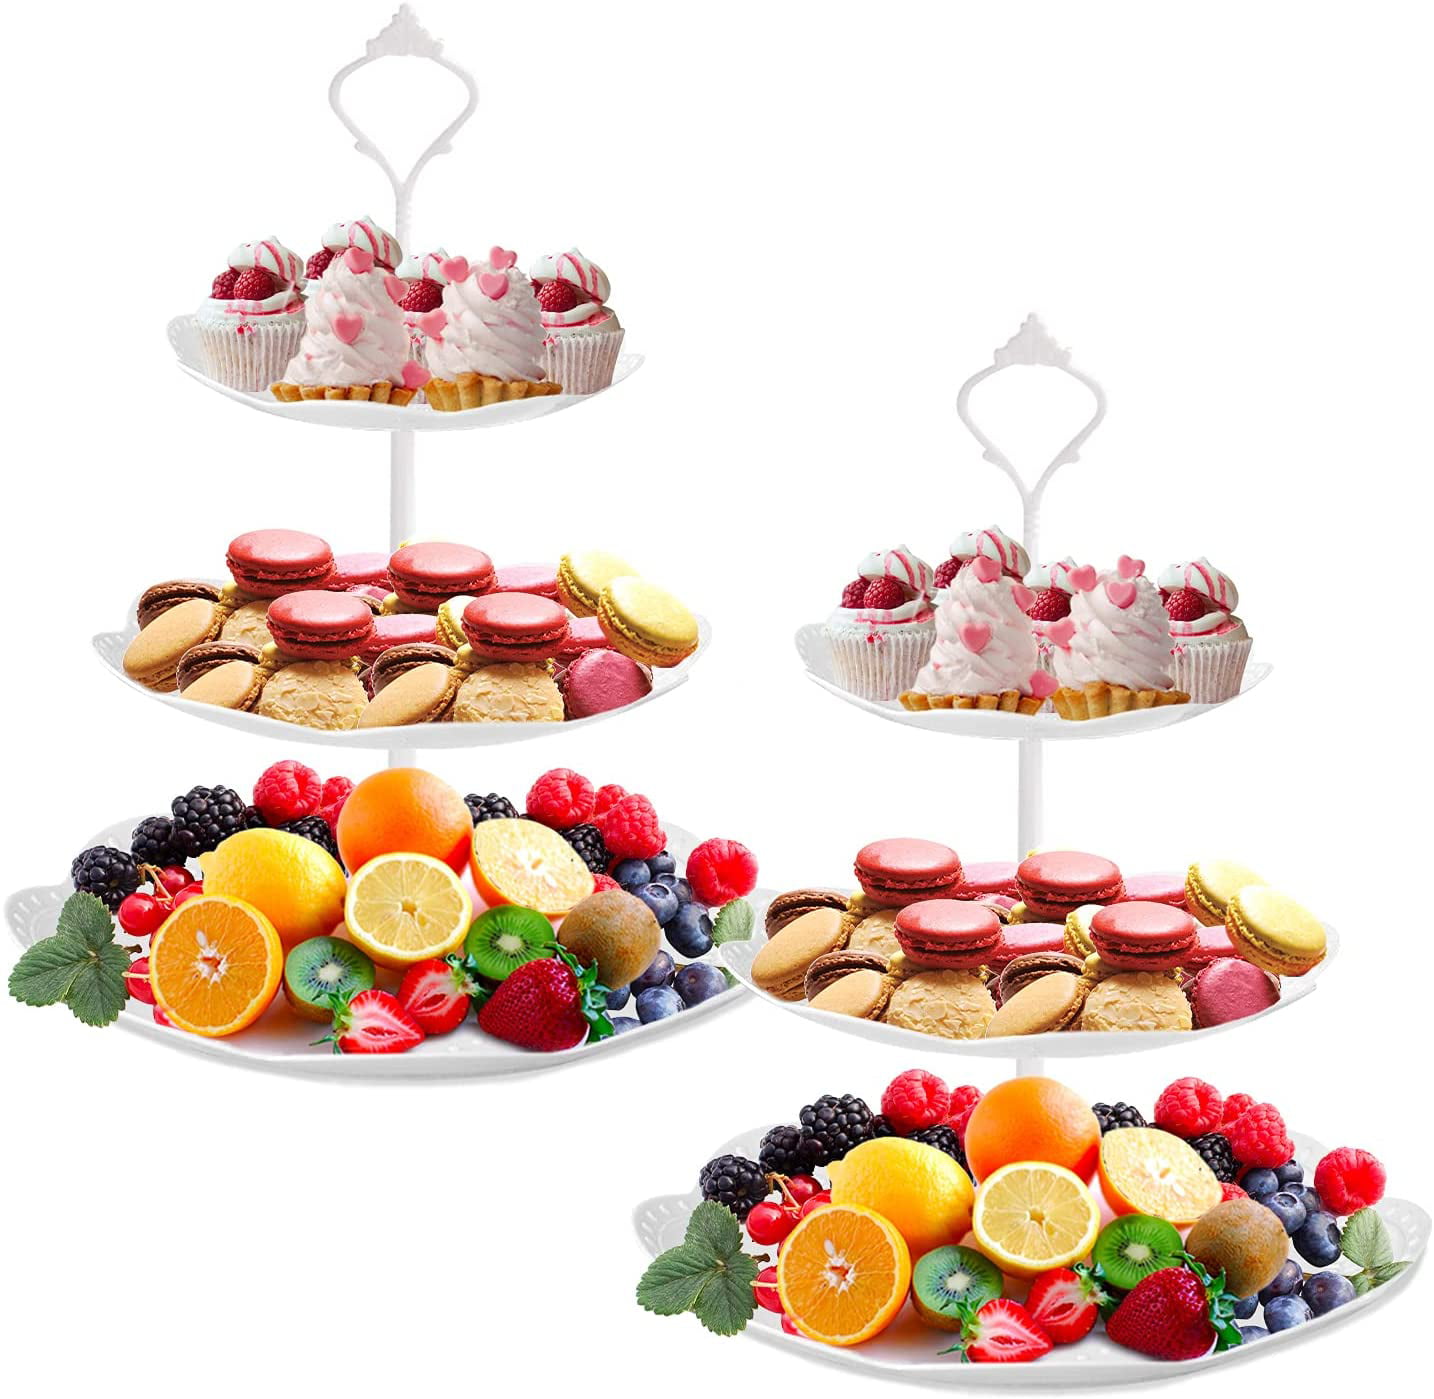 Flunyina 3-Tier Paper Cake Stands Christmas Tree and Star Style Party Favour Holding Stands Dessert Candy Chocolate Jelly Snacks Bread Tower Serving Tray for Christams Dinner Party Xmas Themed Wedding Birthday Baby Shower Decoration Se o Green and Silver